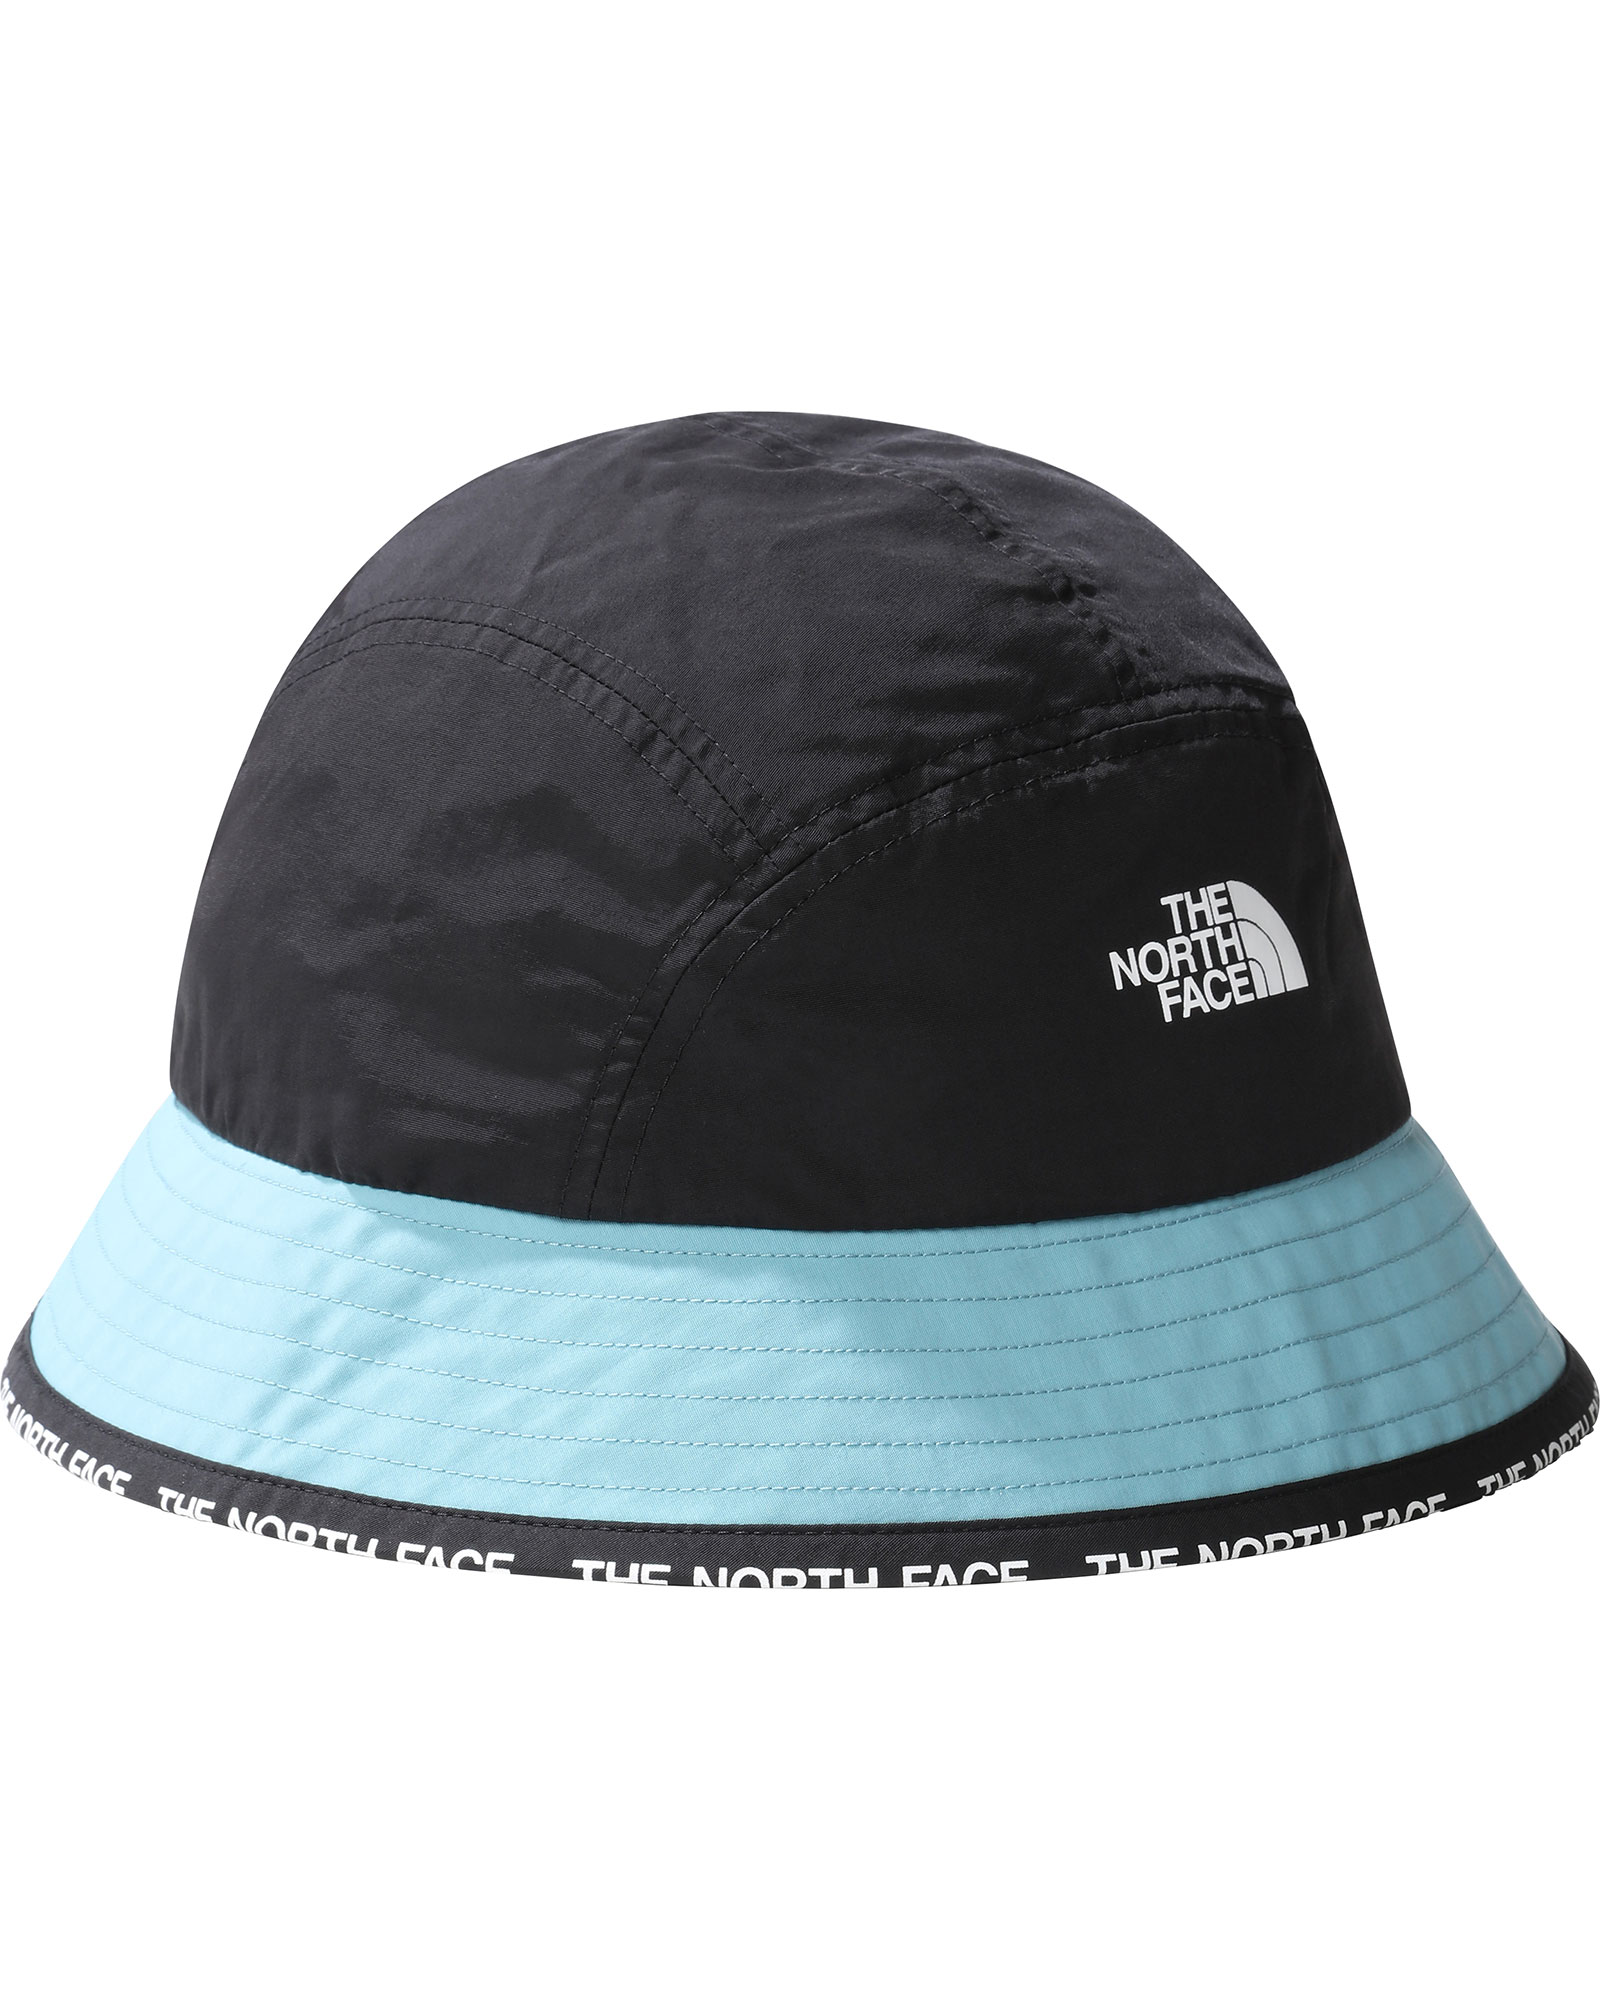 The North Face Cypress Bucket Hat - Reef Waters S/M